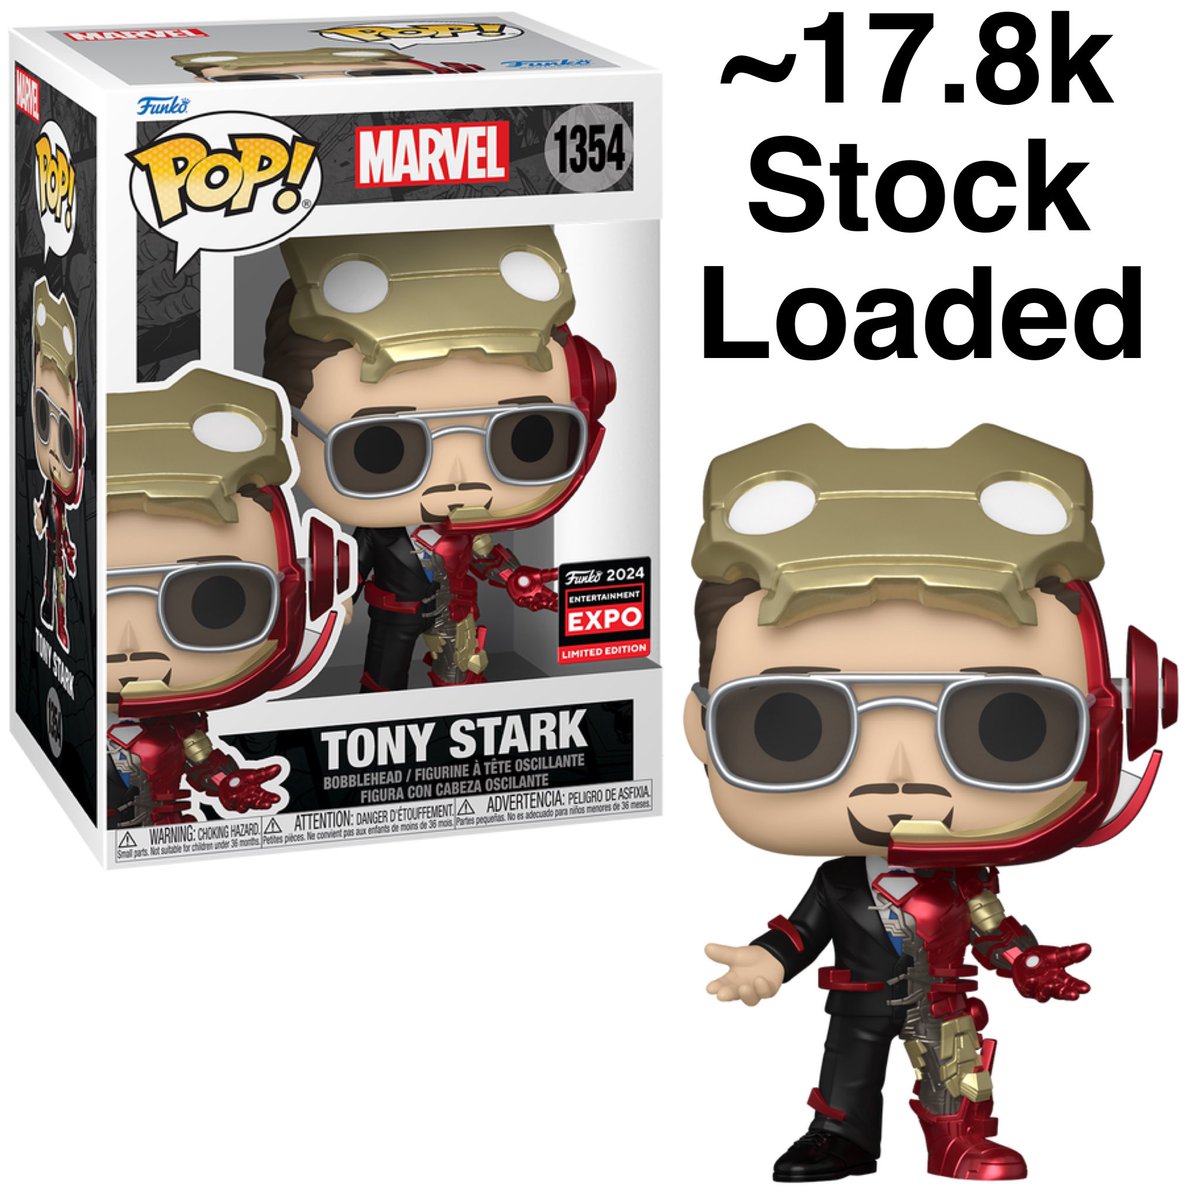 17,820 quantities are loaded of C2E2 shared exclusive Tony Stark! This may change by the release date 4/26 at the Funko Shop. 
.
distracker.info/4aBifn9 #Ad
.
Credit @pop_holmes 
#Marvel #TonyStark #IronMan #Funko #FunkoPop #FunkoPopVinyl #Pop #PopVinyl #Collectibles #Collectible…